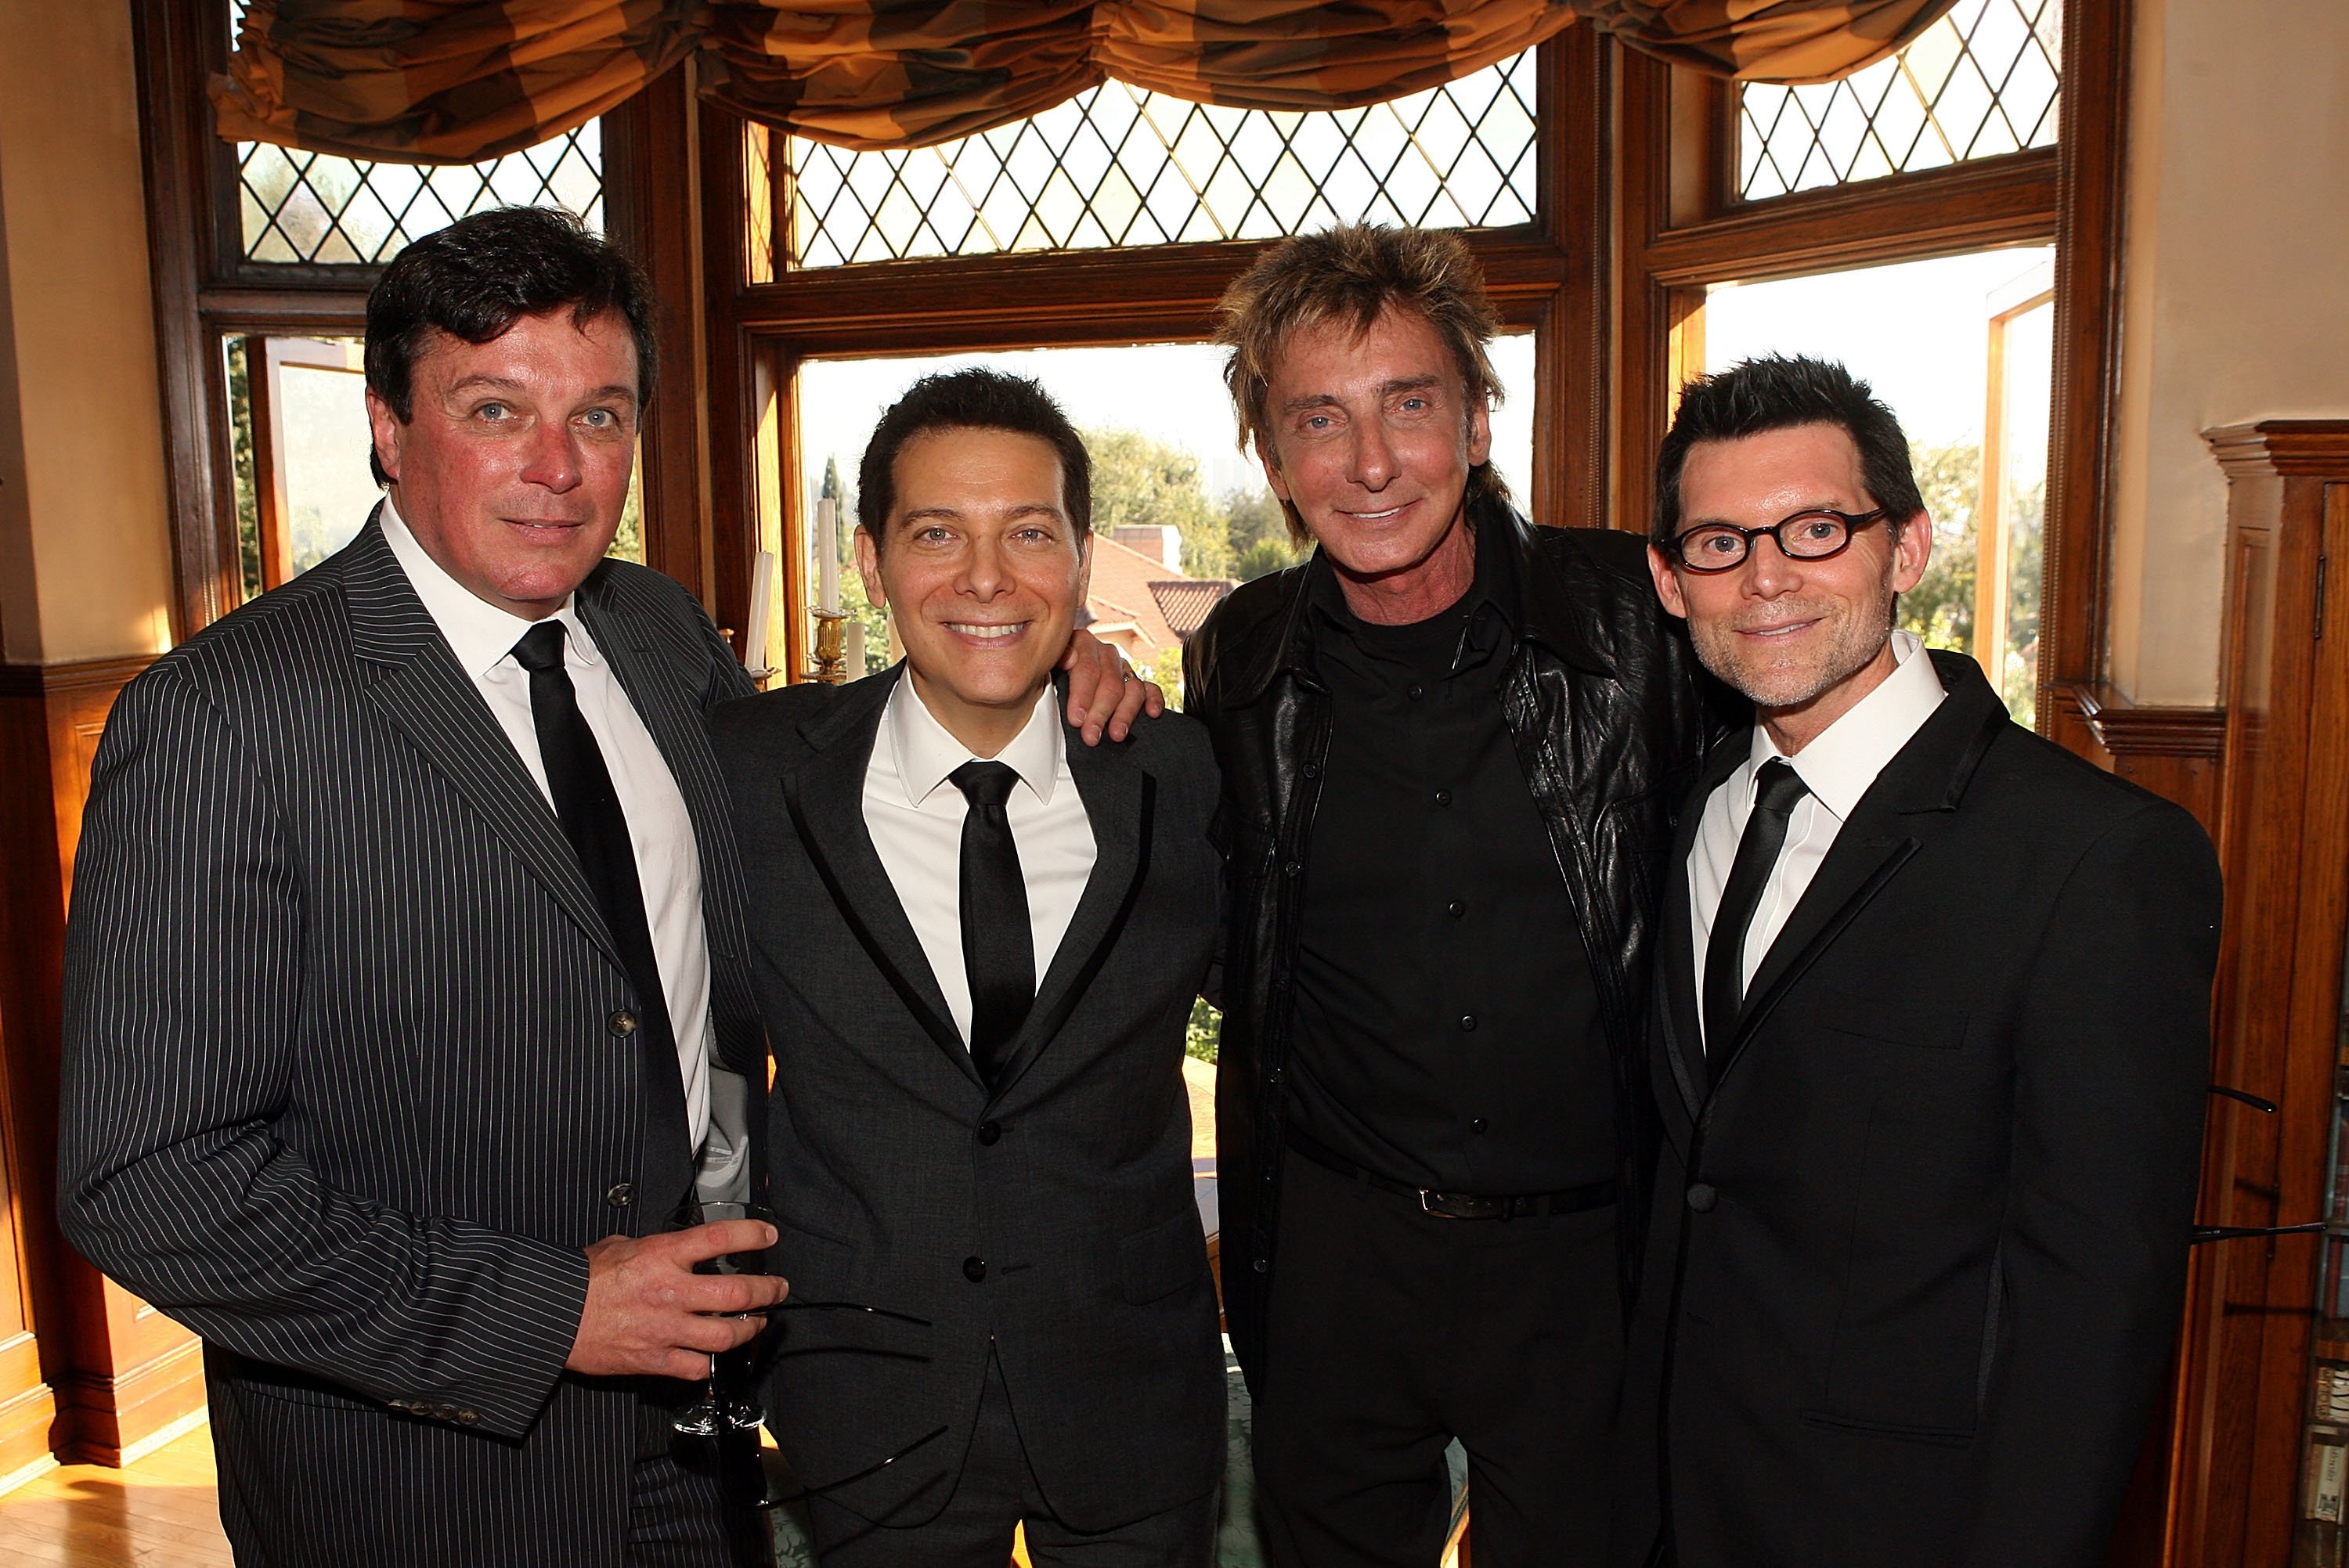 Garry Kief and Barry Manilow attend the wedding of Michael Feinstein and Terrence Flannery held at a private residence on October 17, 2008 in Los Angeles, California | Source: Getty Images